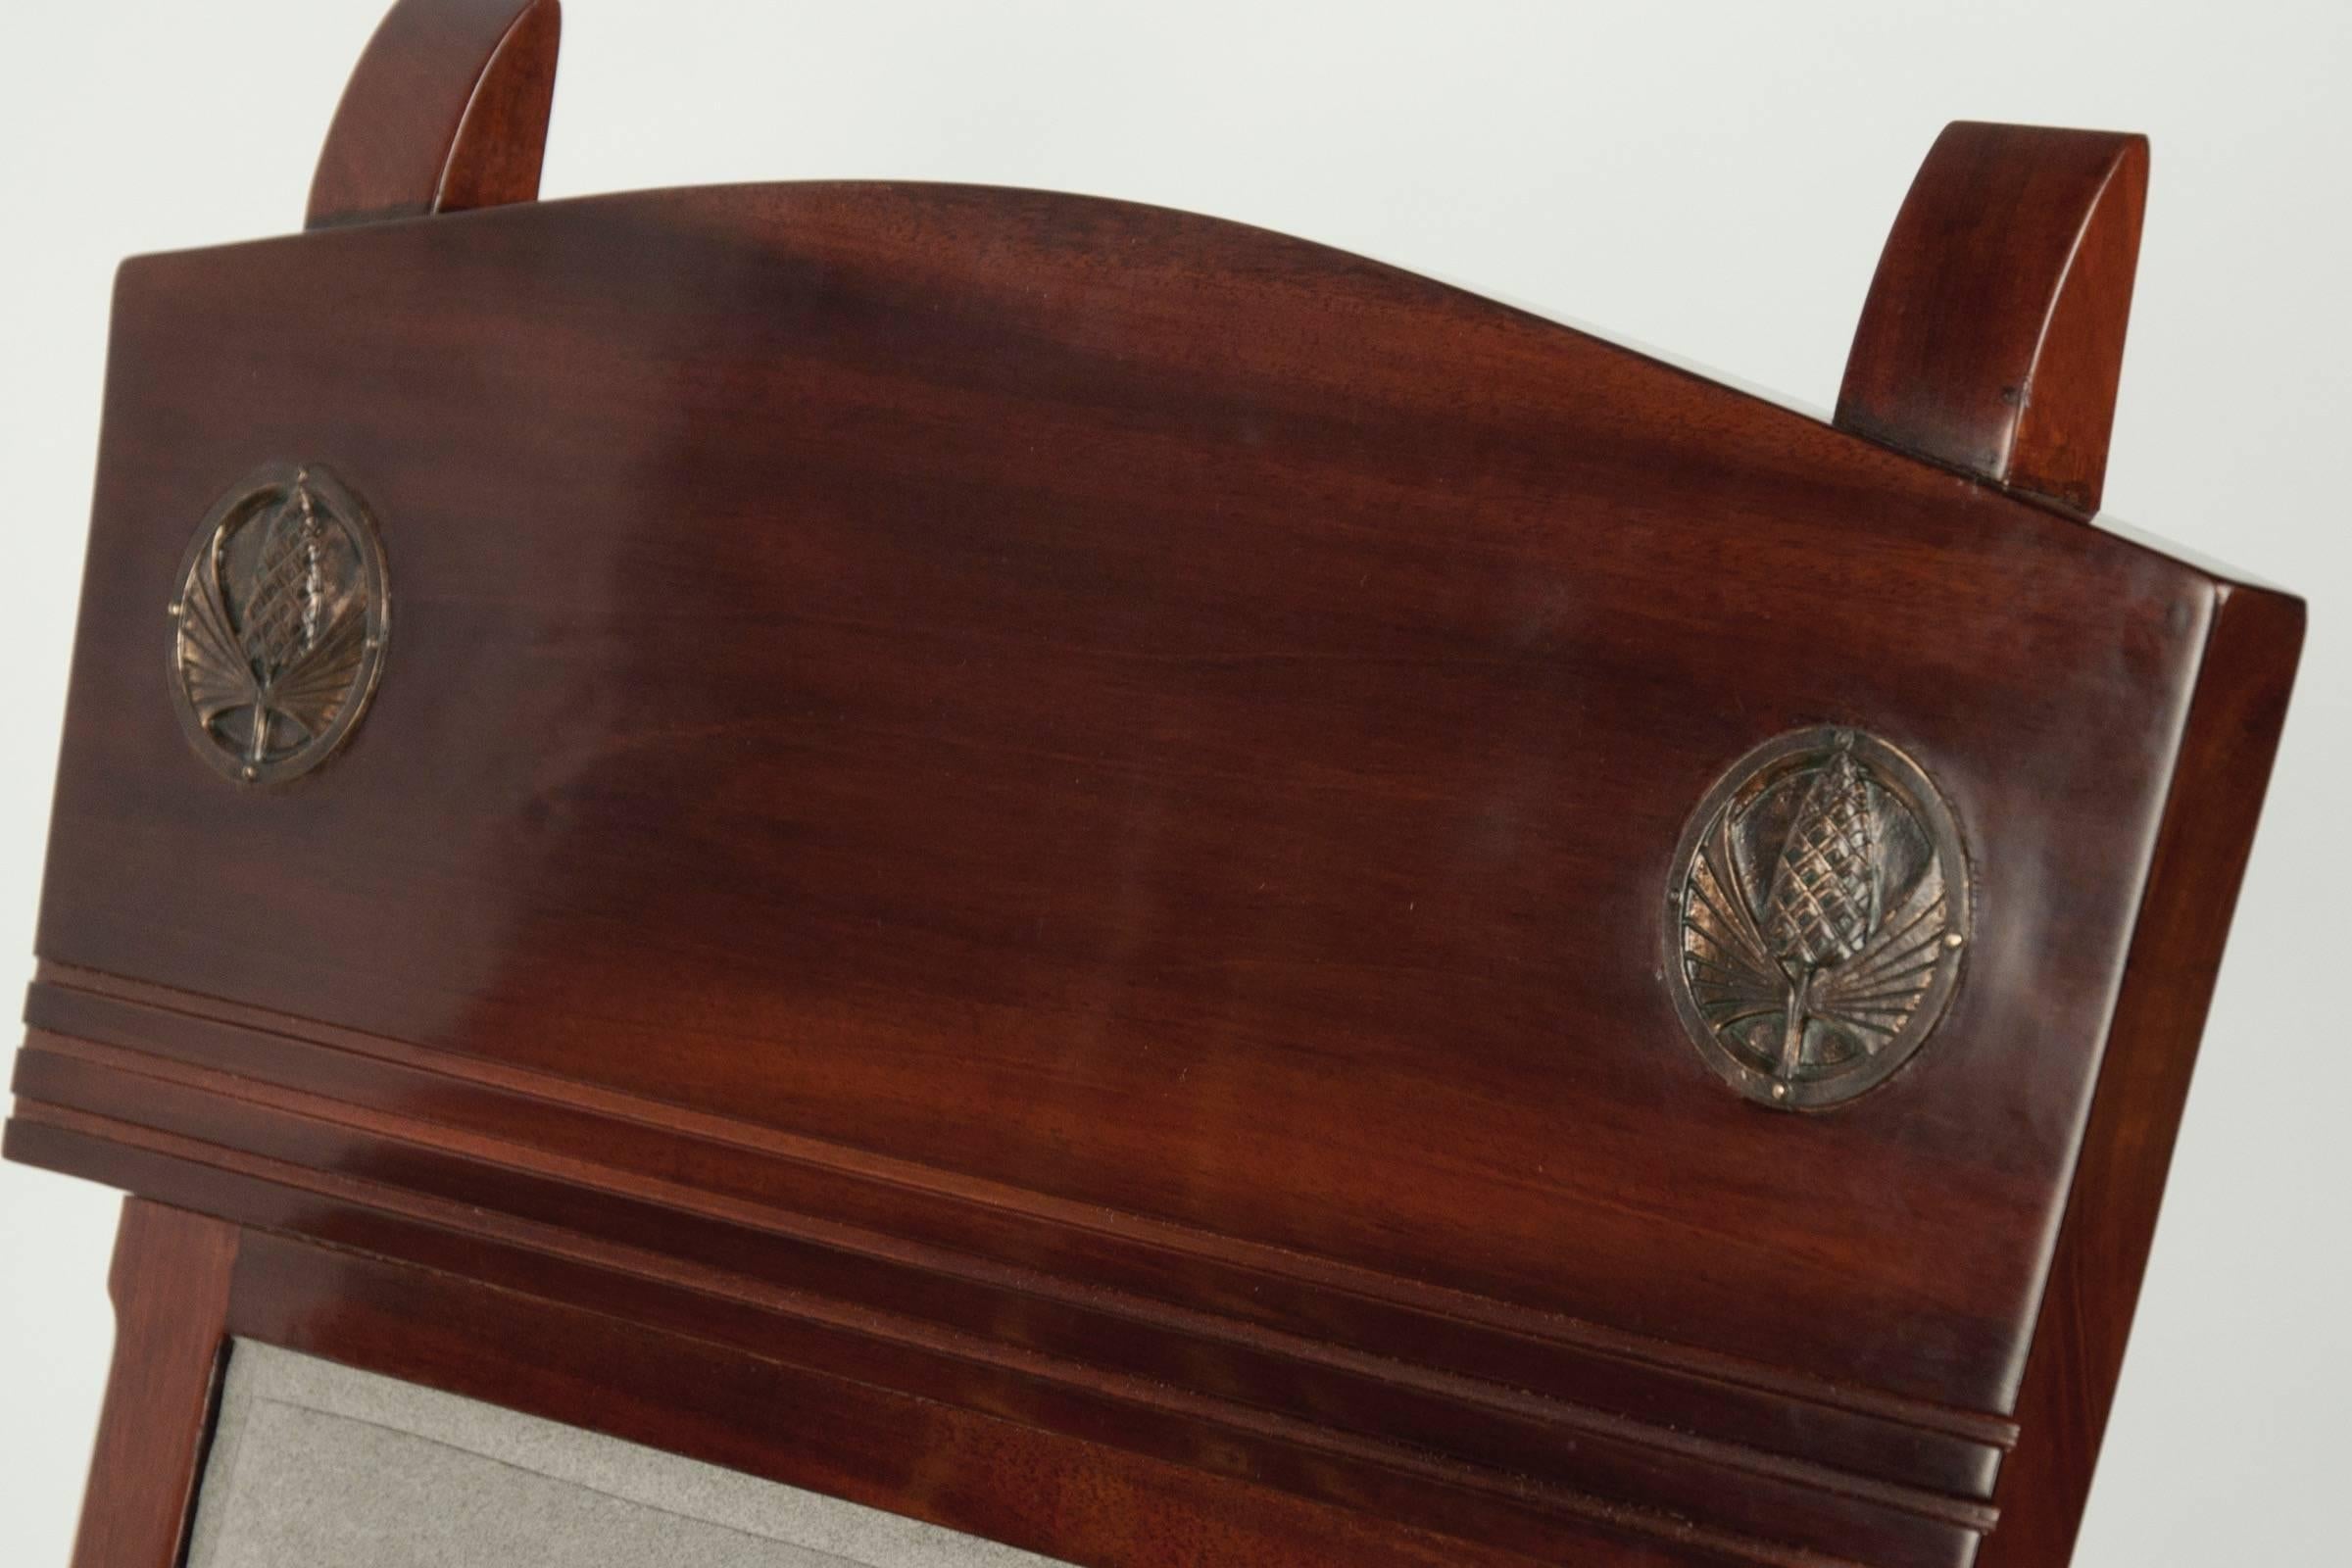 Low curved walnut frame, carved with straight grooves along the back and inset with two bronze plaques decorated with a pine-cone motif. Signed.
  
OUR REFERENCE N6489
 